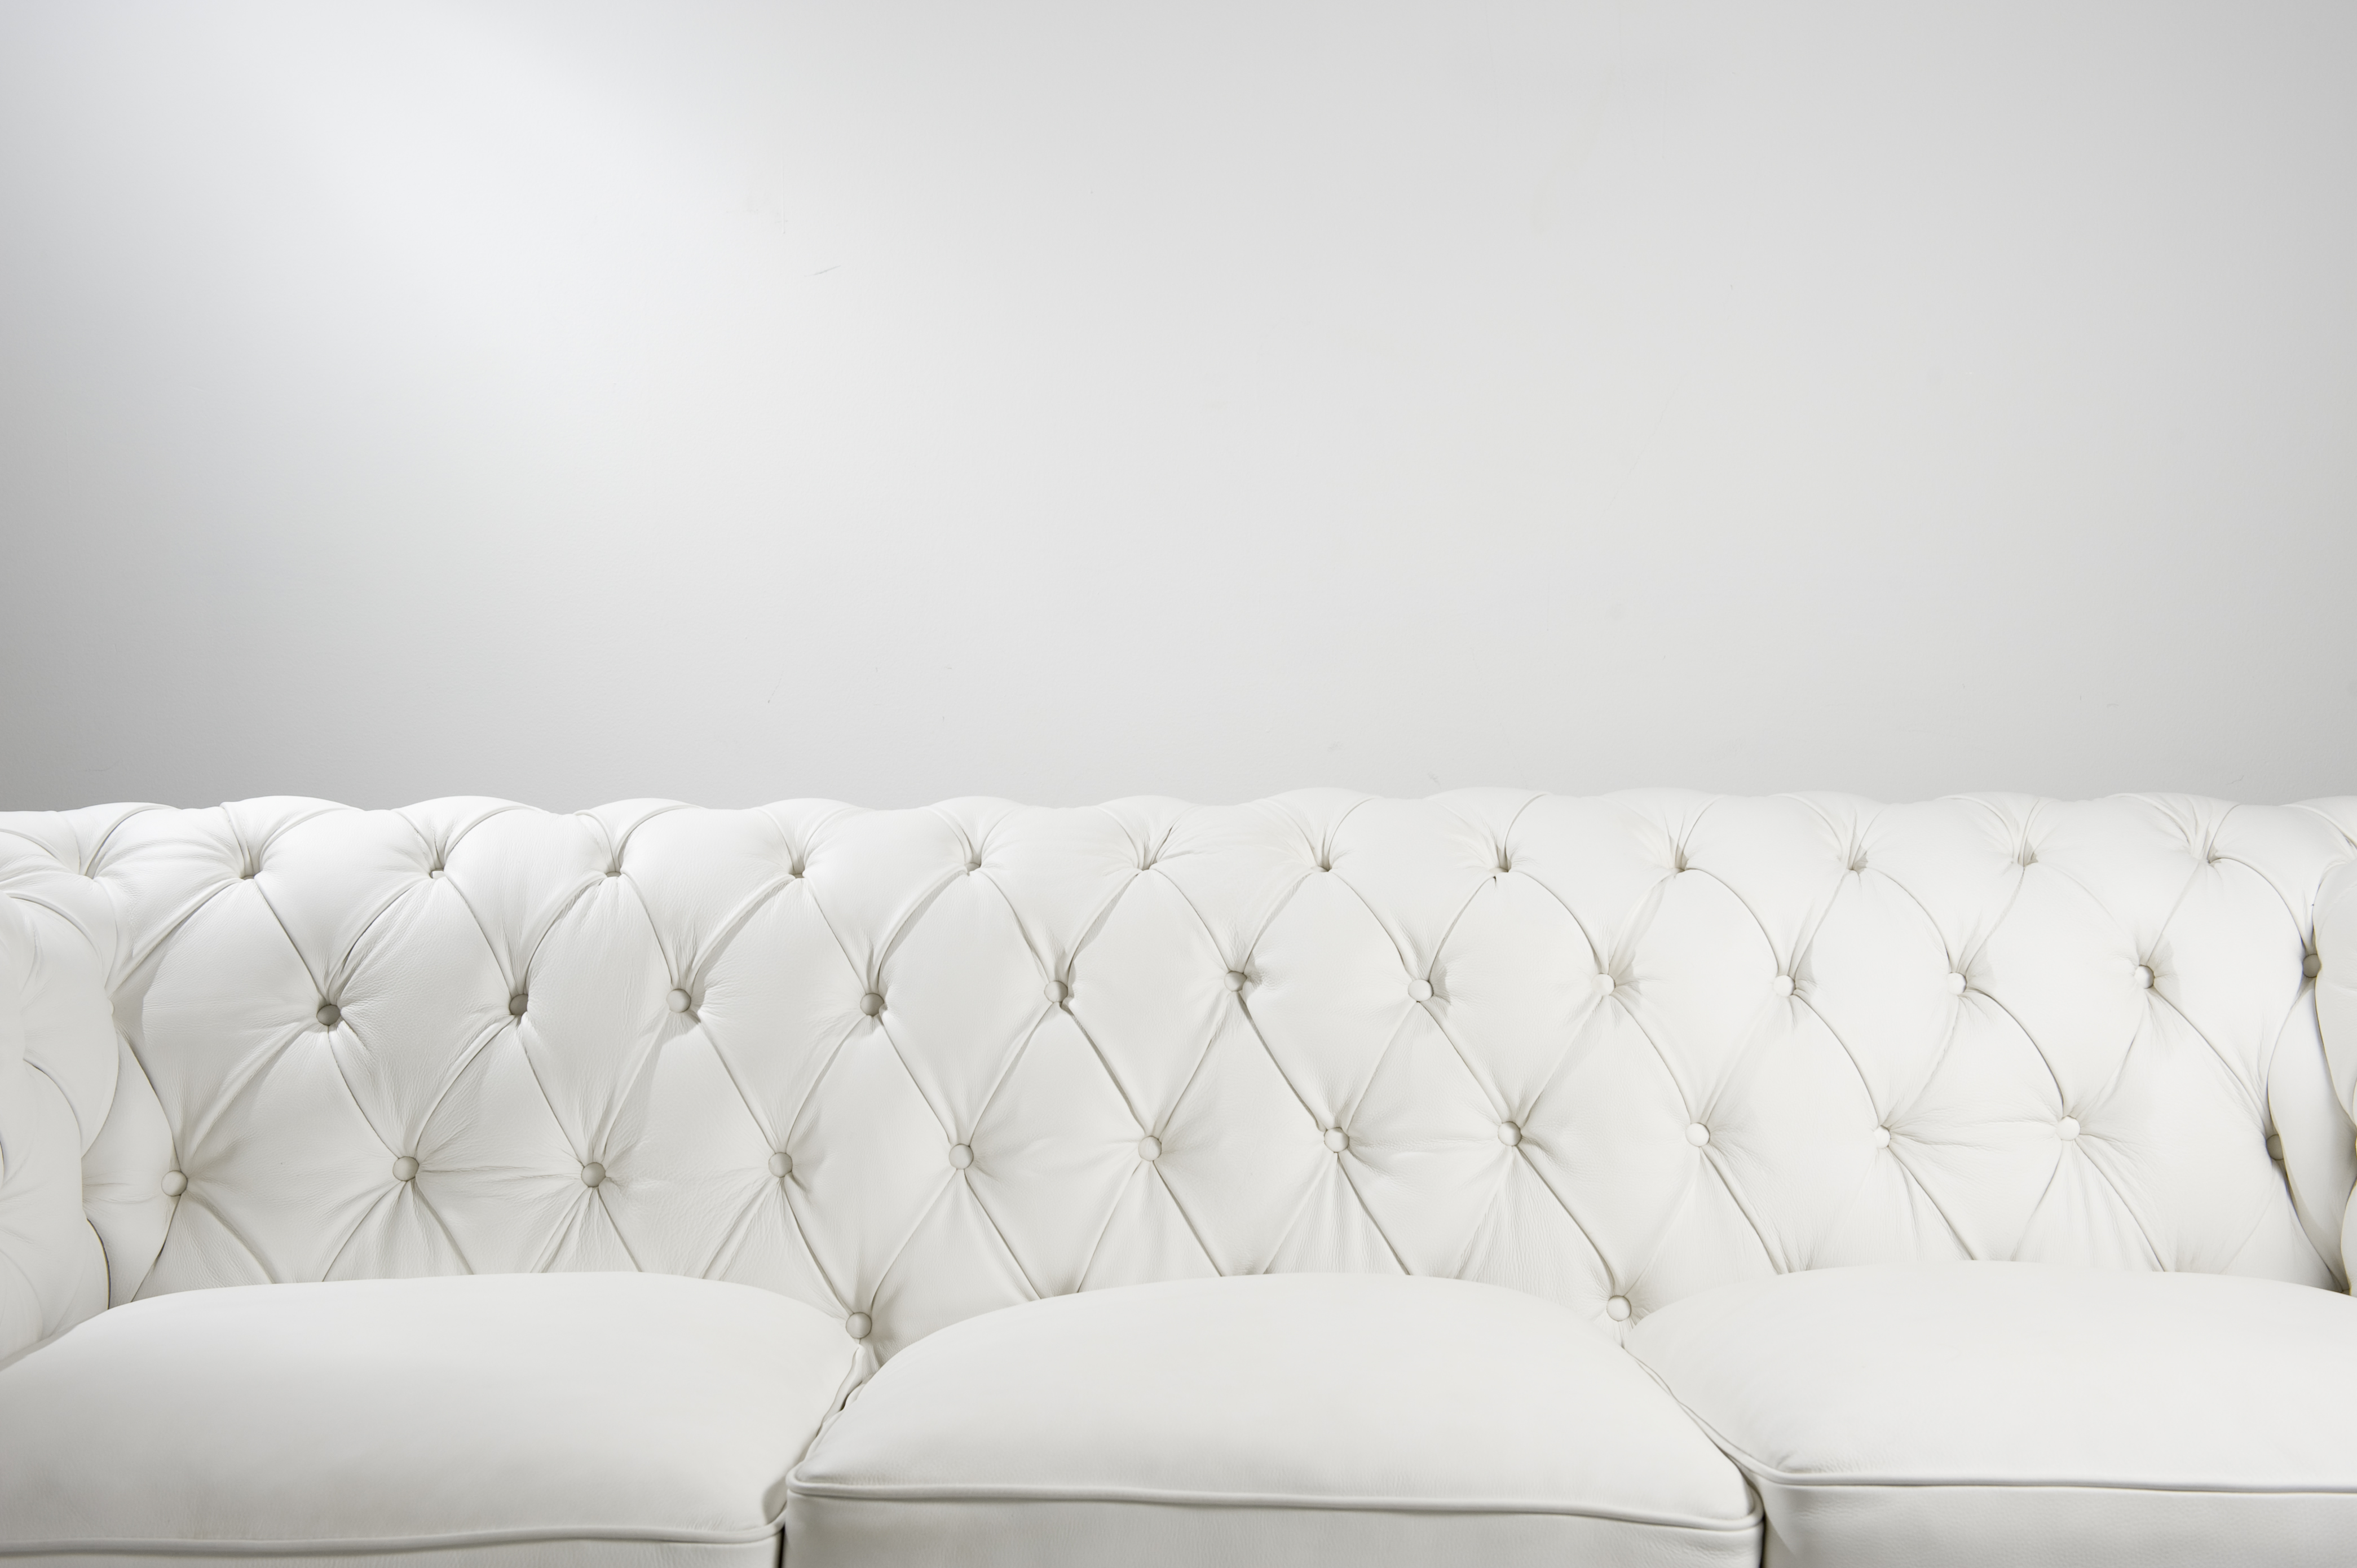 How to Clean White Leather: From Shoes to Sofas